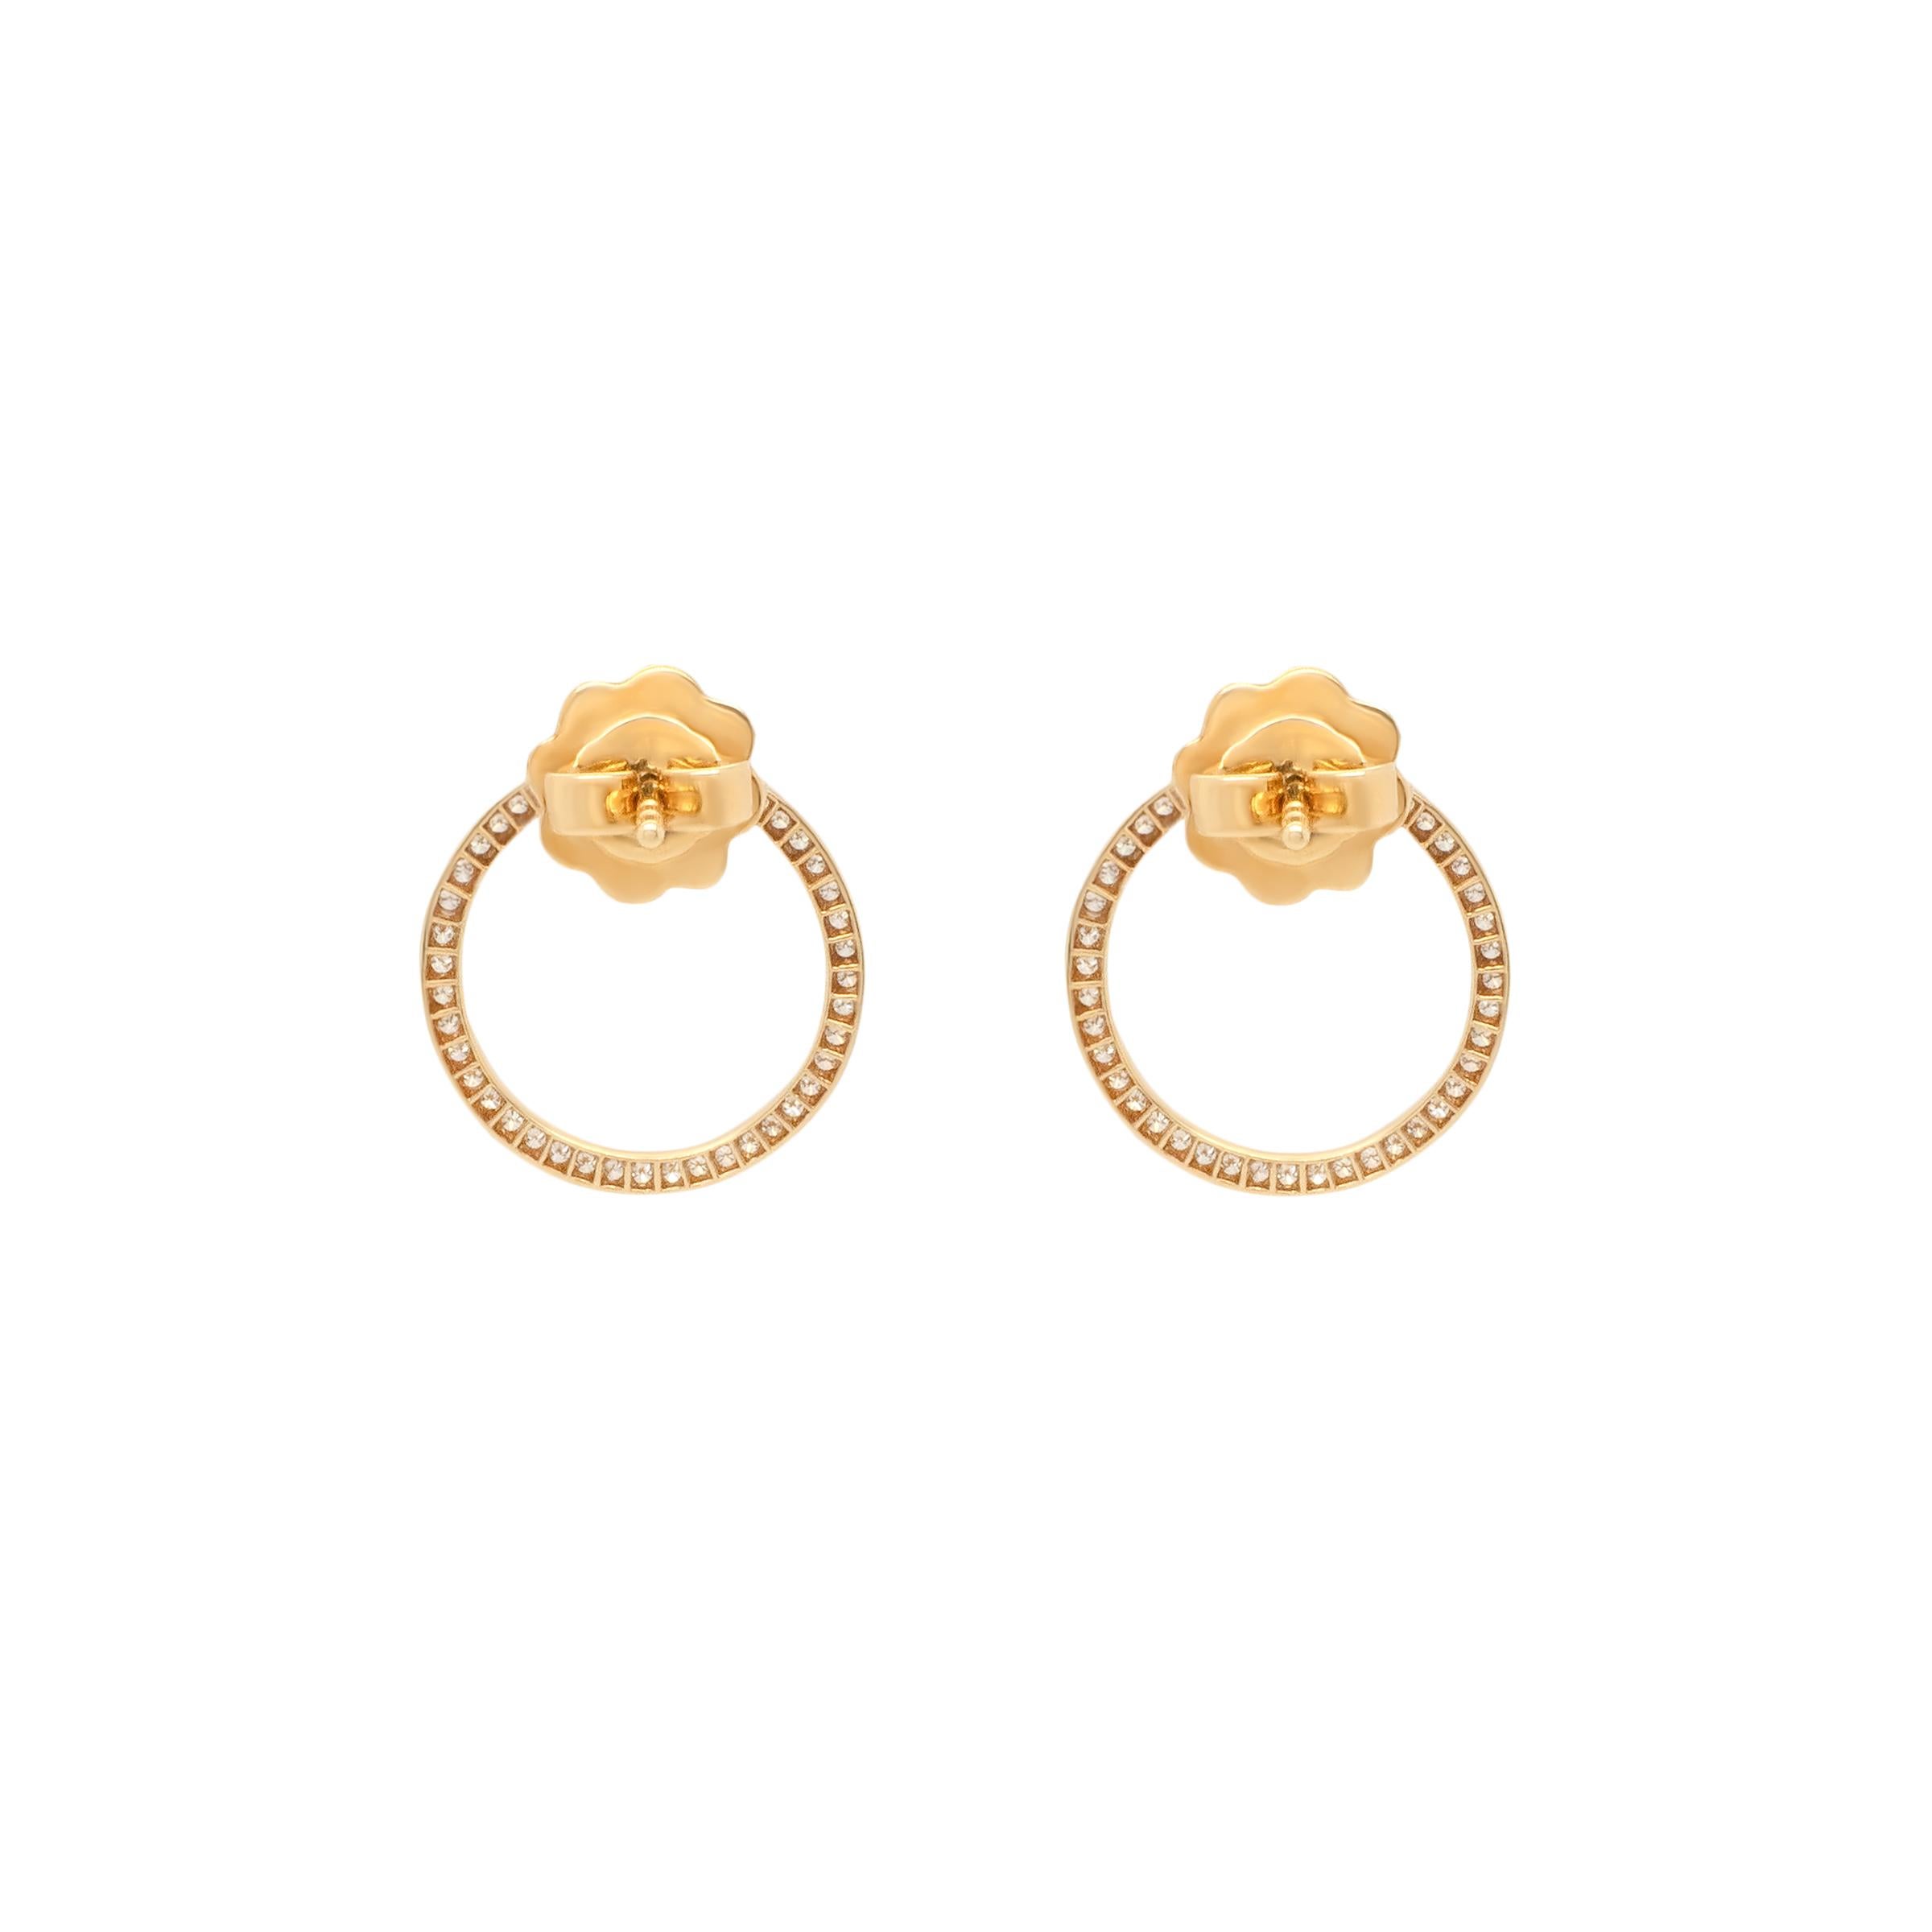 These fun and playful circle earrings are made from sparkling pav'ed diamonds. The VVS diamonds are set into the the circle design and are perfect for daily wear or dressed up for the evening. 